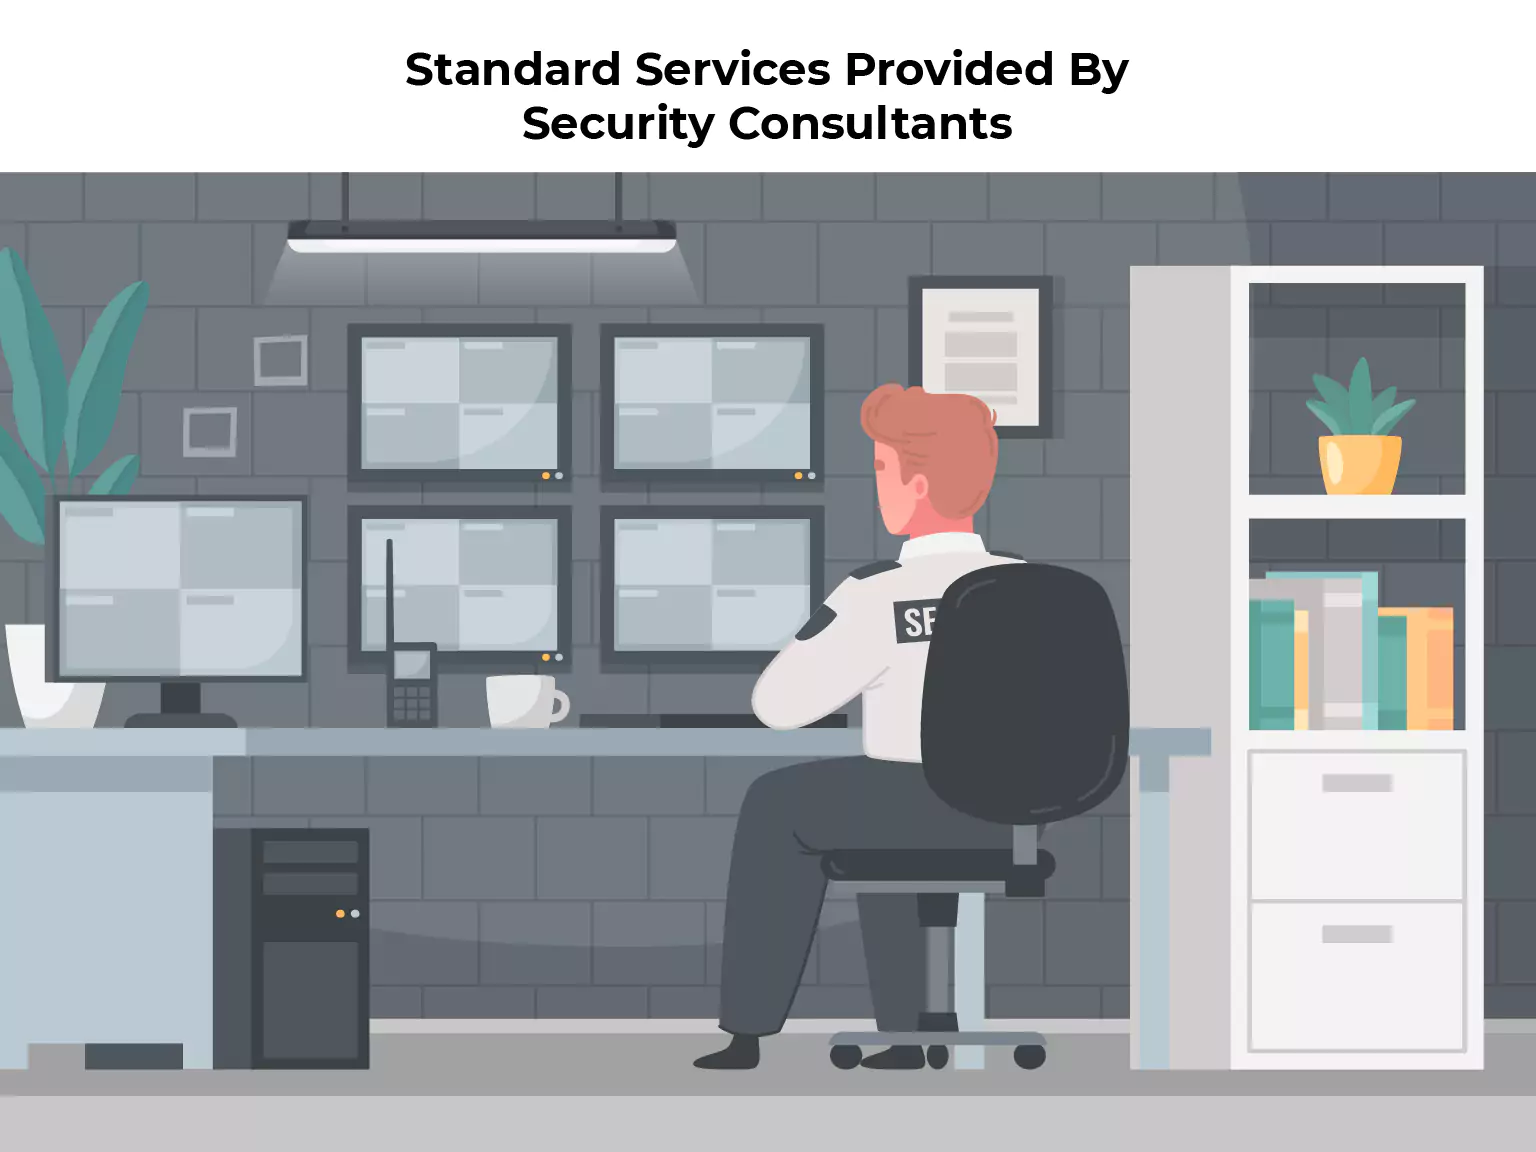 Standard Services Provided By Security Consultants